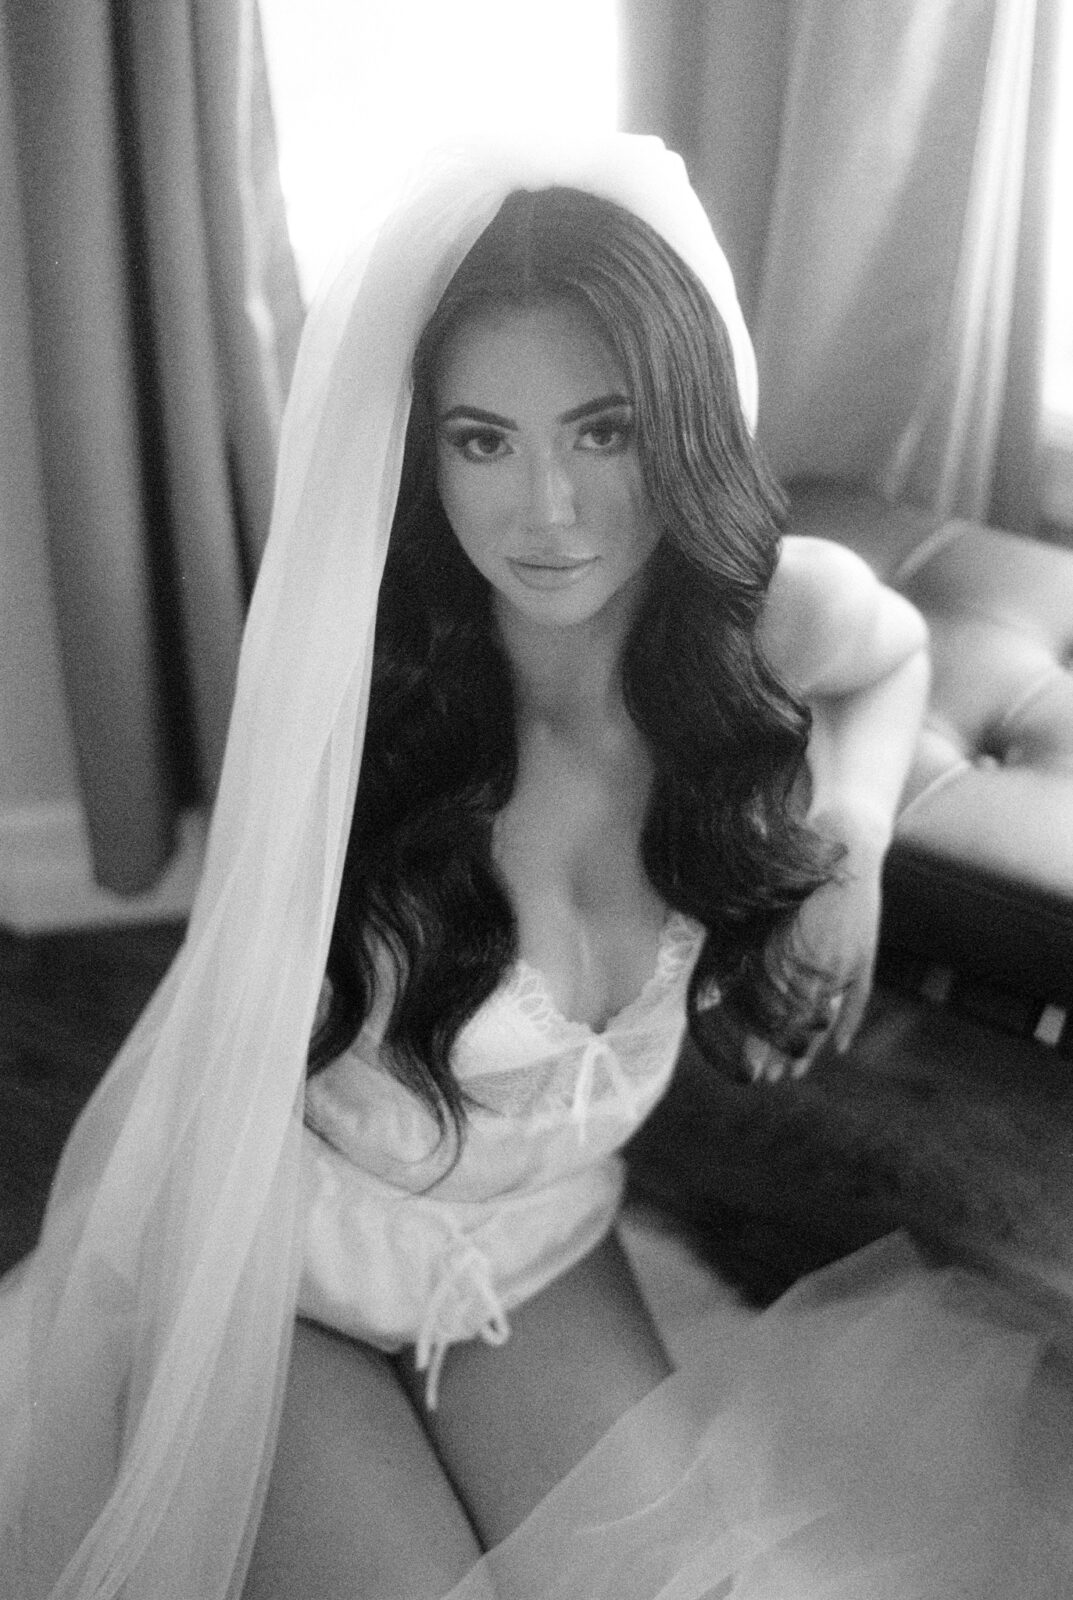 Seductive elegance in black and white bridal boudoir portraits, Bride posing in white lingerie and veil for intimate bridal photoshoot